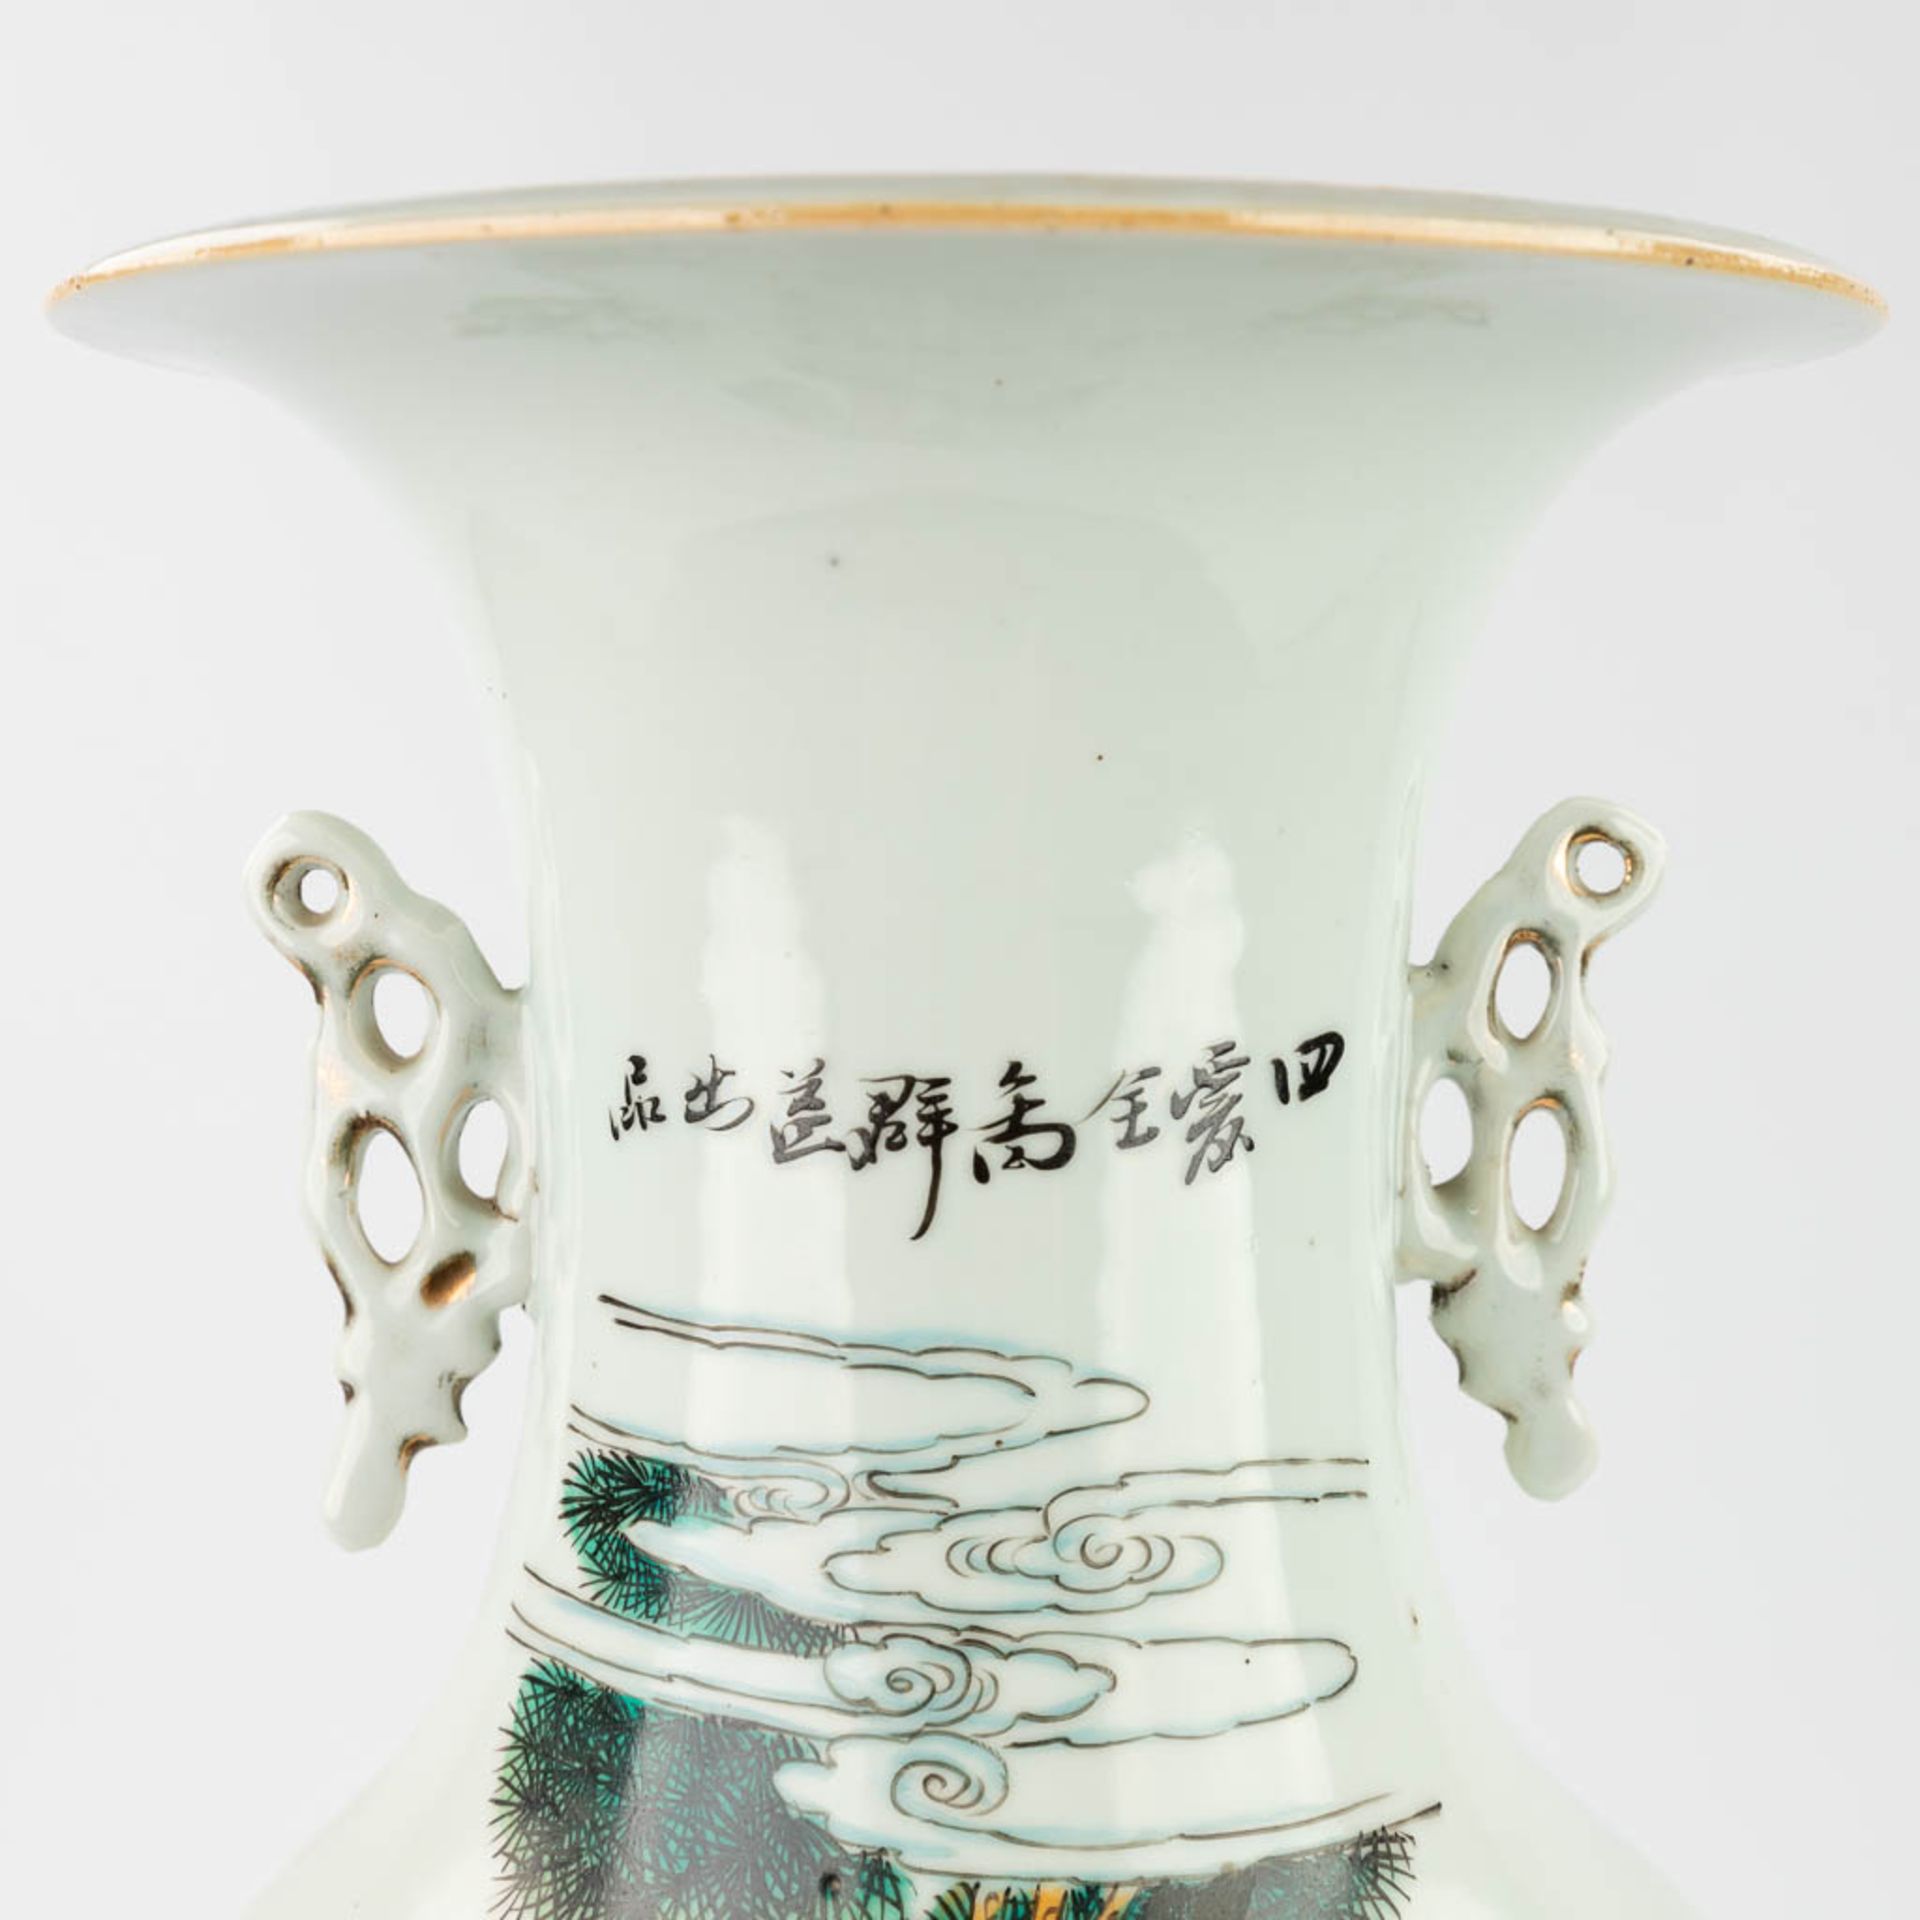 A Chinese vase made of porcelain and decorated with wise men in the garden. (59 x 23 cm) - Image 10 of 14